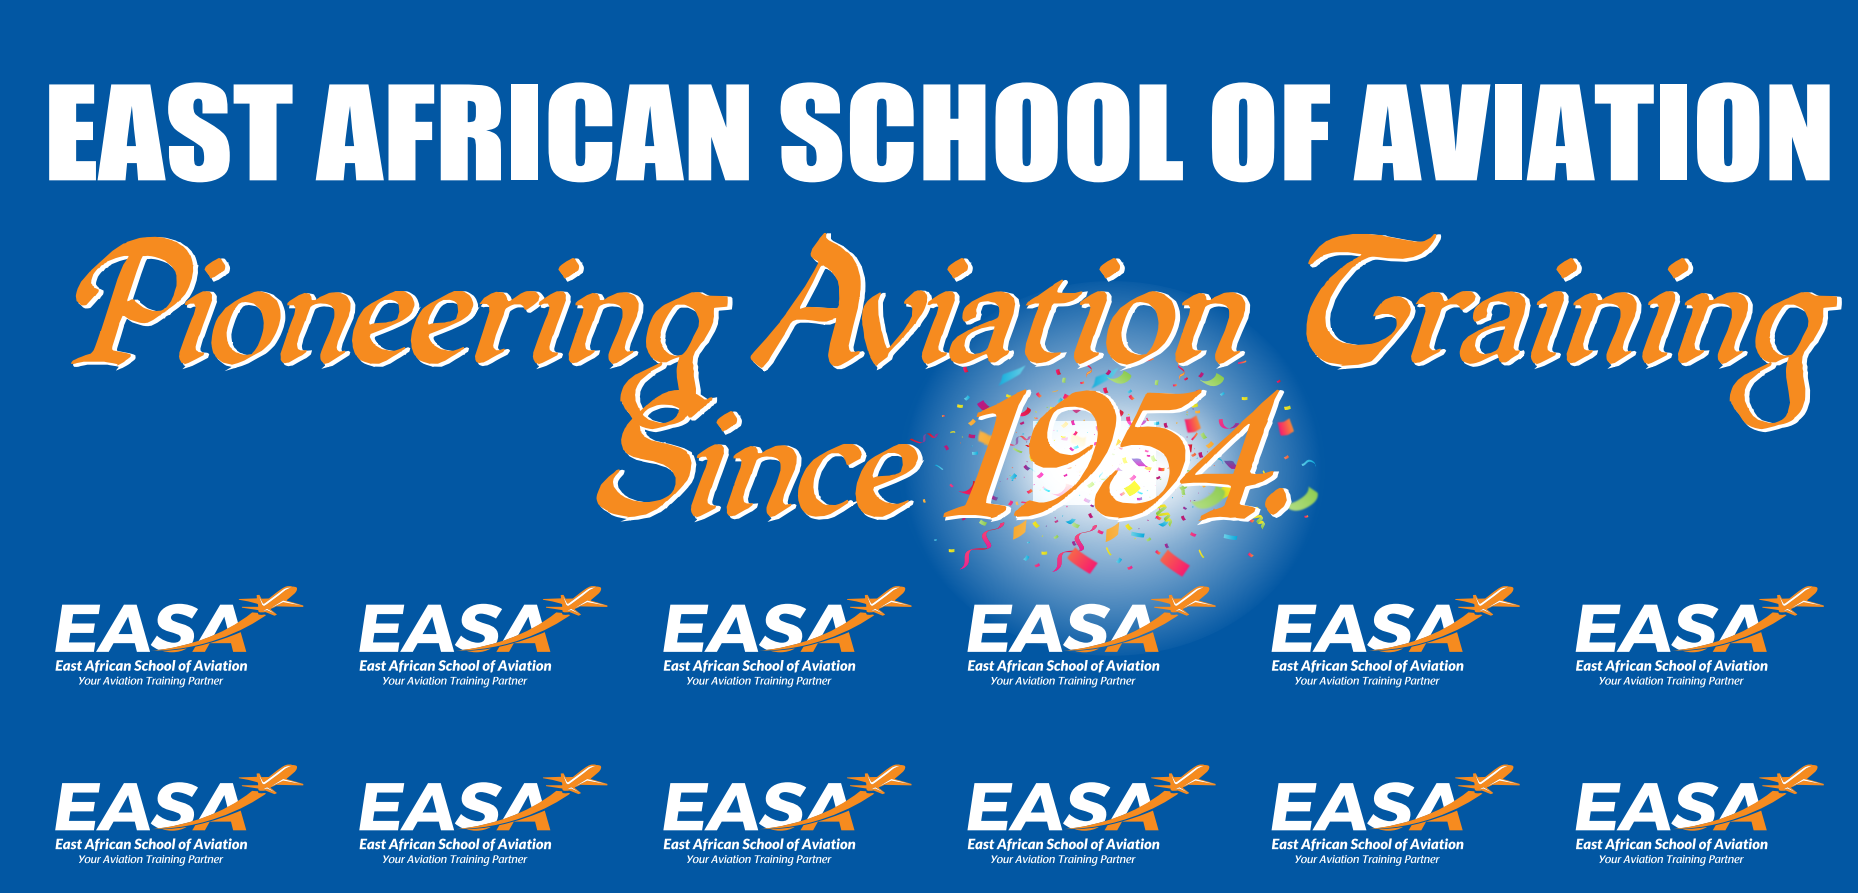 70 Years of Aviation Training Excellence